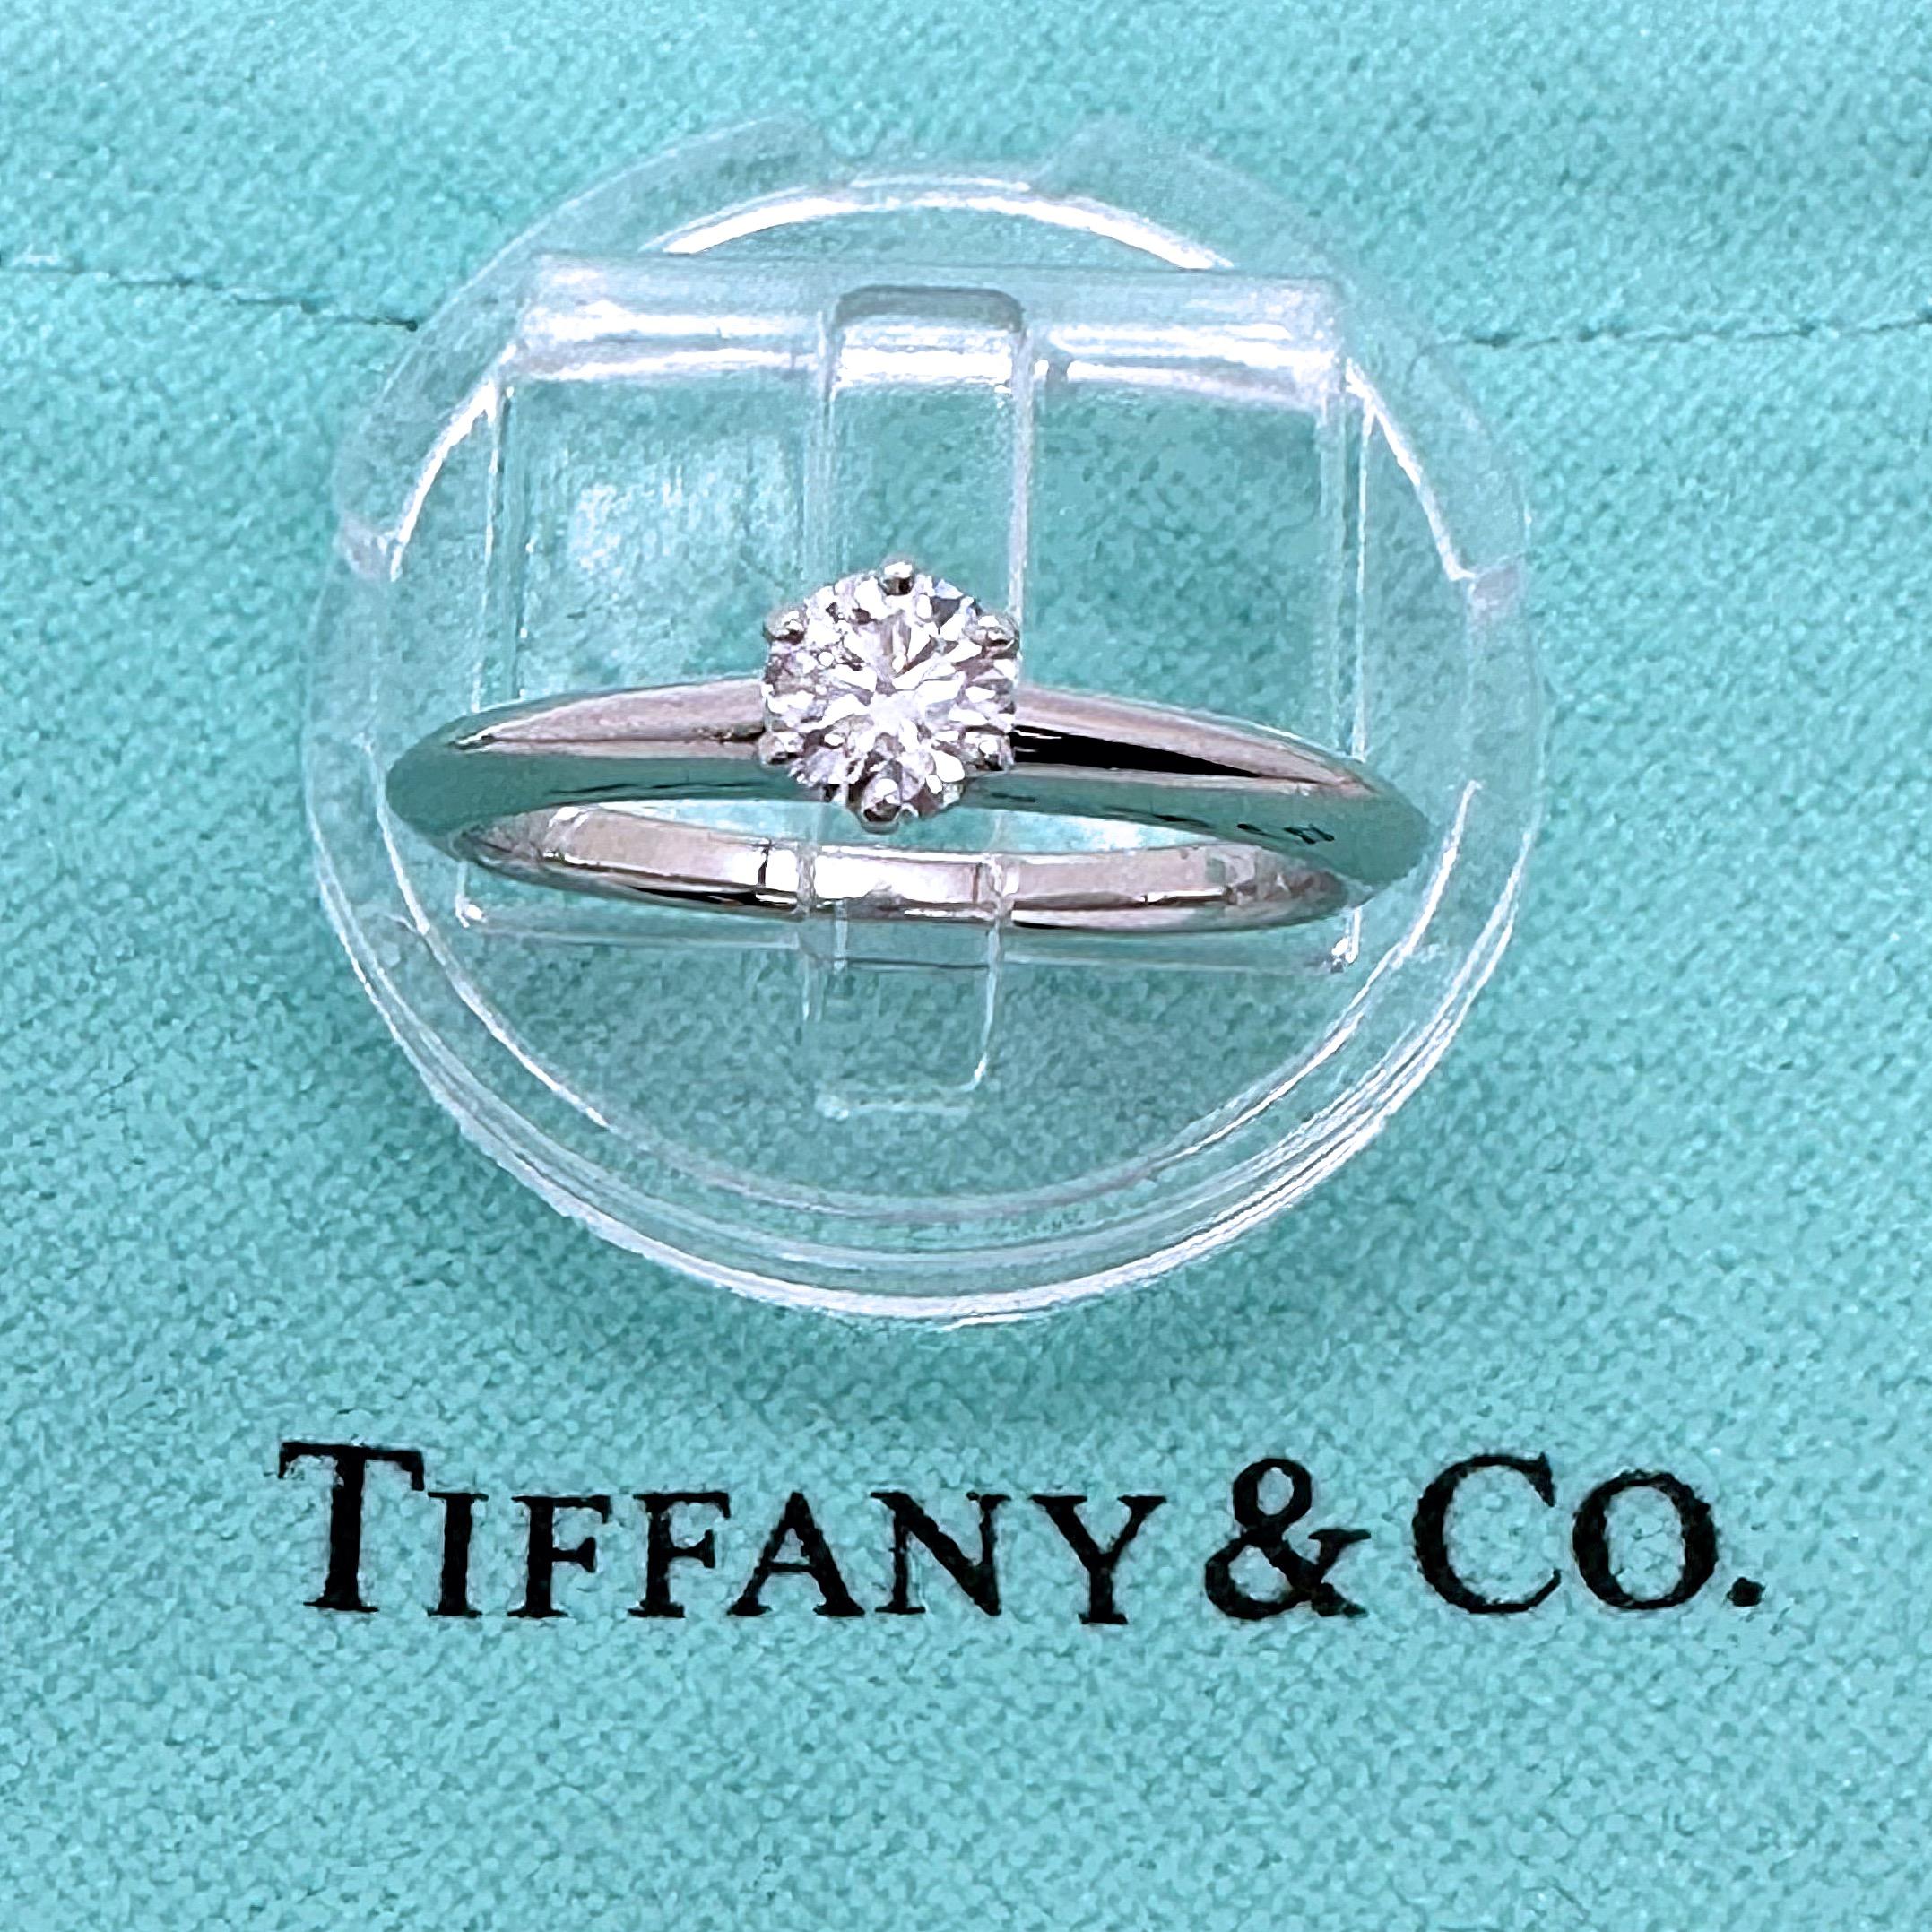 Tiffany & Co RBD Solitaire Engagement Ring
Style:  6-Prong
Ref. number:  D36755
Metal:  Platinum PT950
Size / Measurements:  6 - sizable
TCW:  0.29 cts
Main Diamond:  Round Brilliant Diamond 0.29 cts
Color & Clarity:  D, IF ( Internally Flawless )